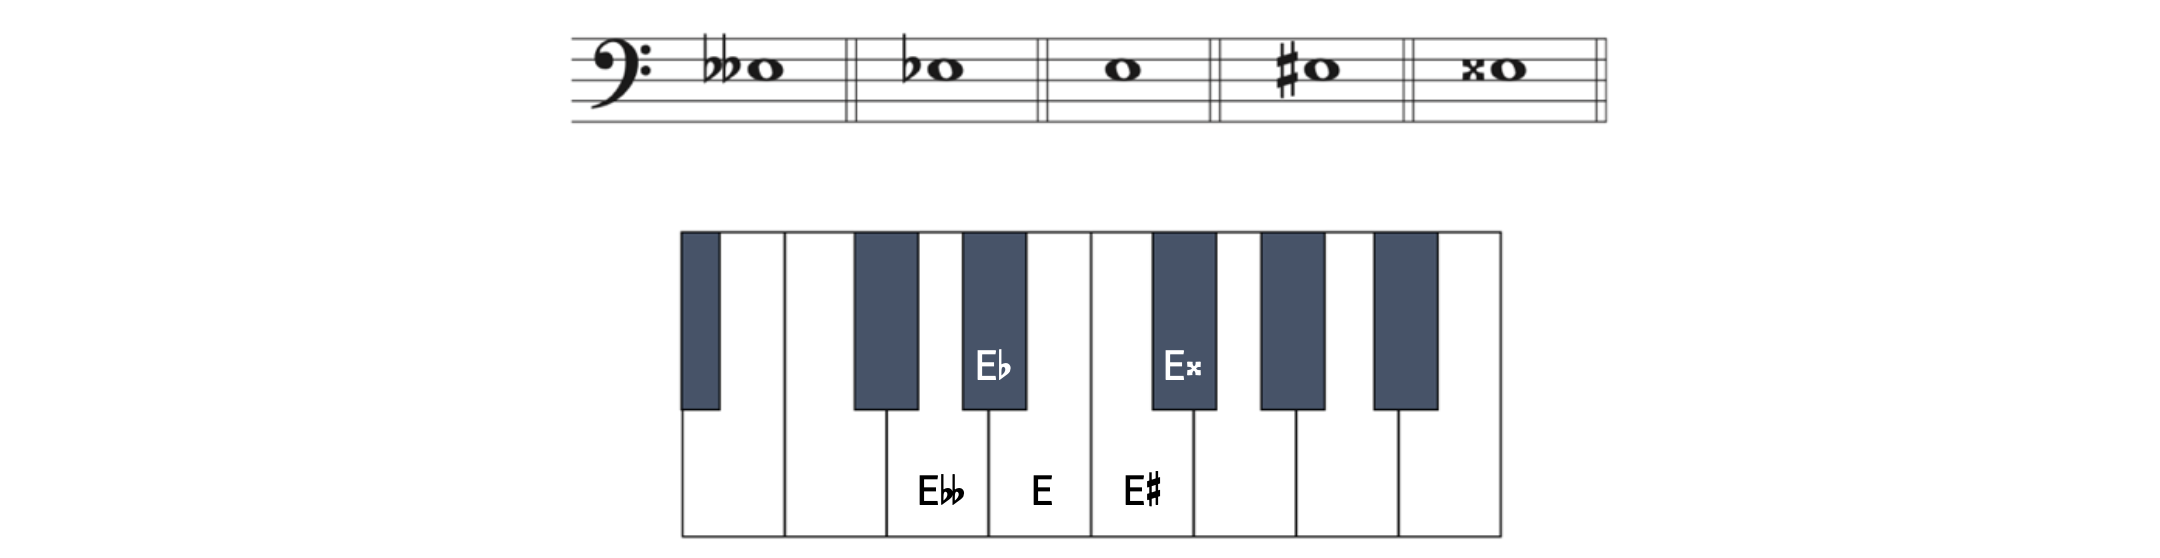 Example showing all the accidentals on E and where they are on the keyboard. E-double flat looks like D on the keyboard. E-flat is the black key to the left of E. E is on E. E-sharp looks like F on the keyboard. E-double sharp is the black key to the right of F.